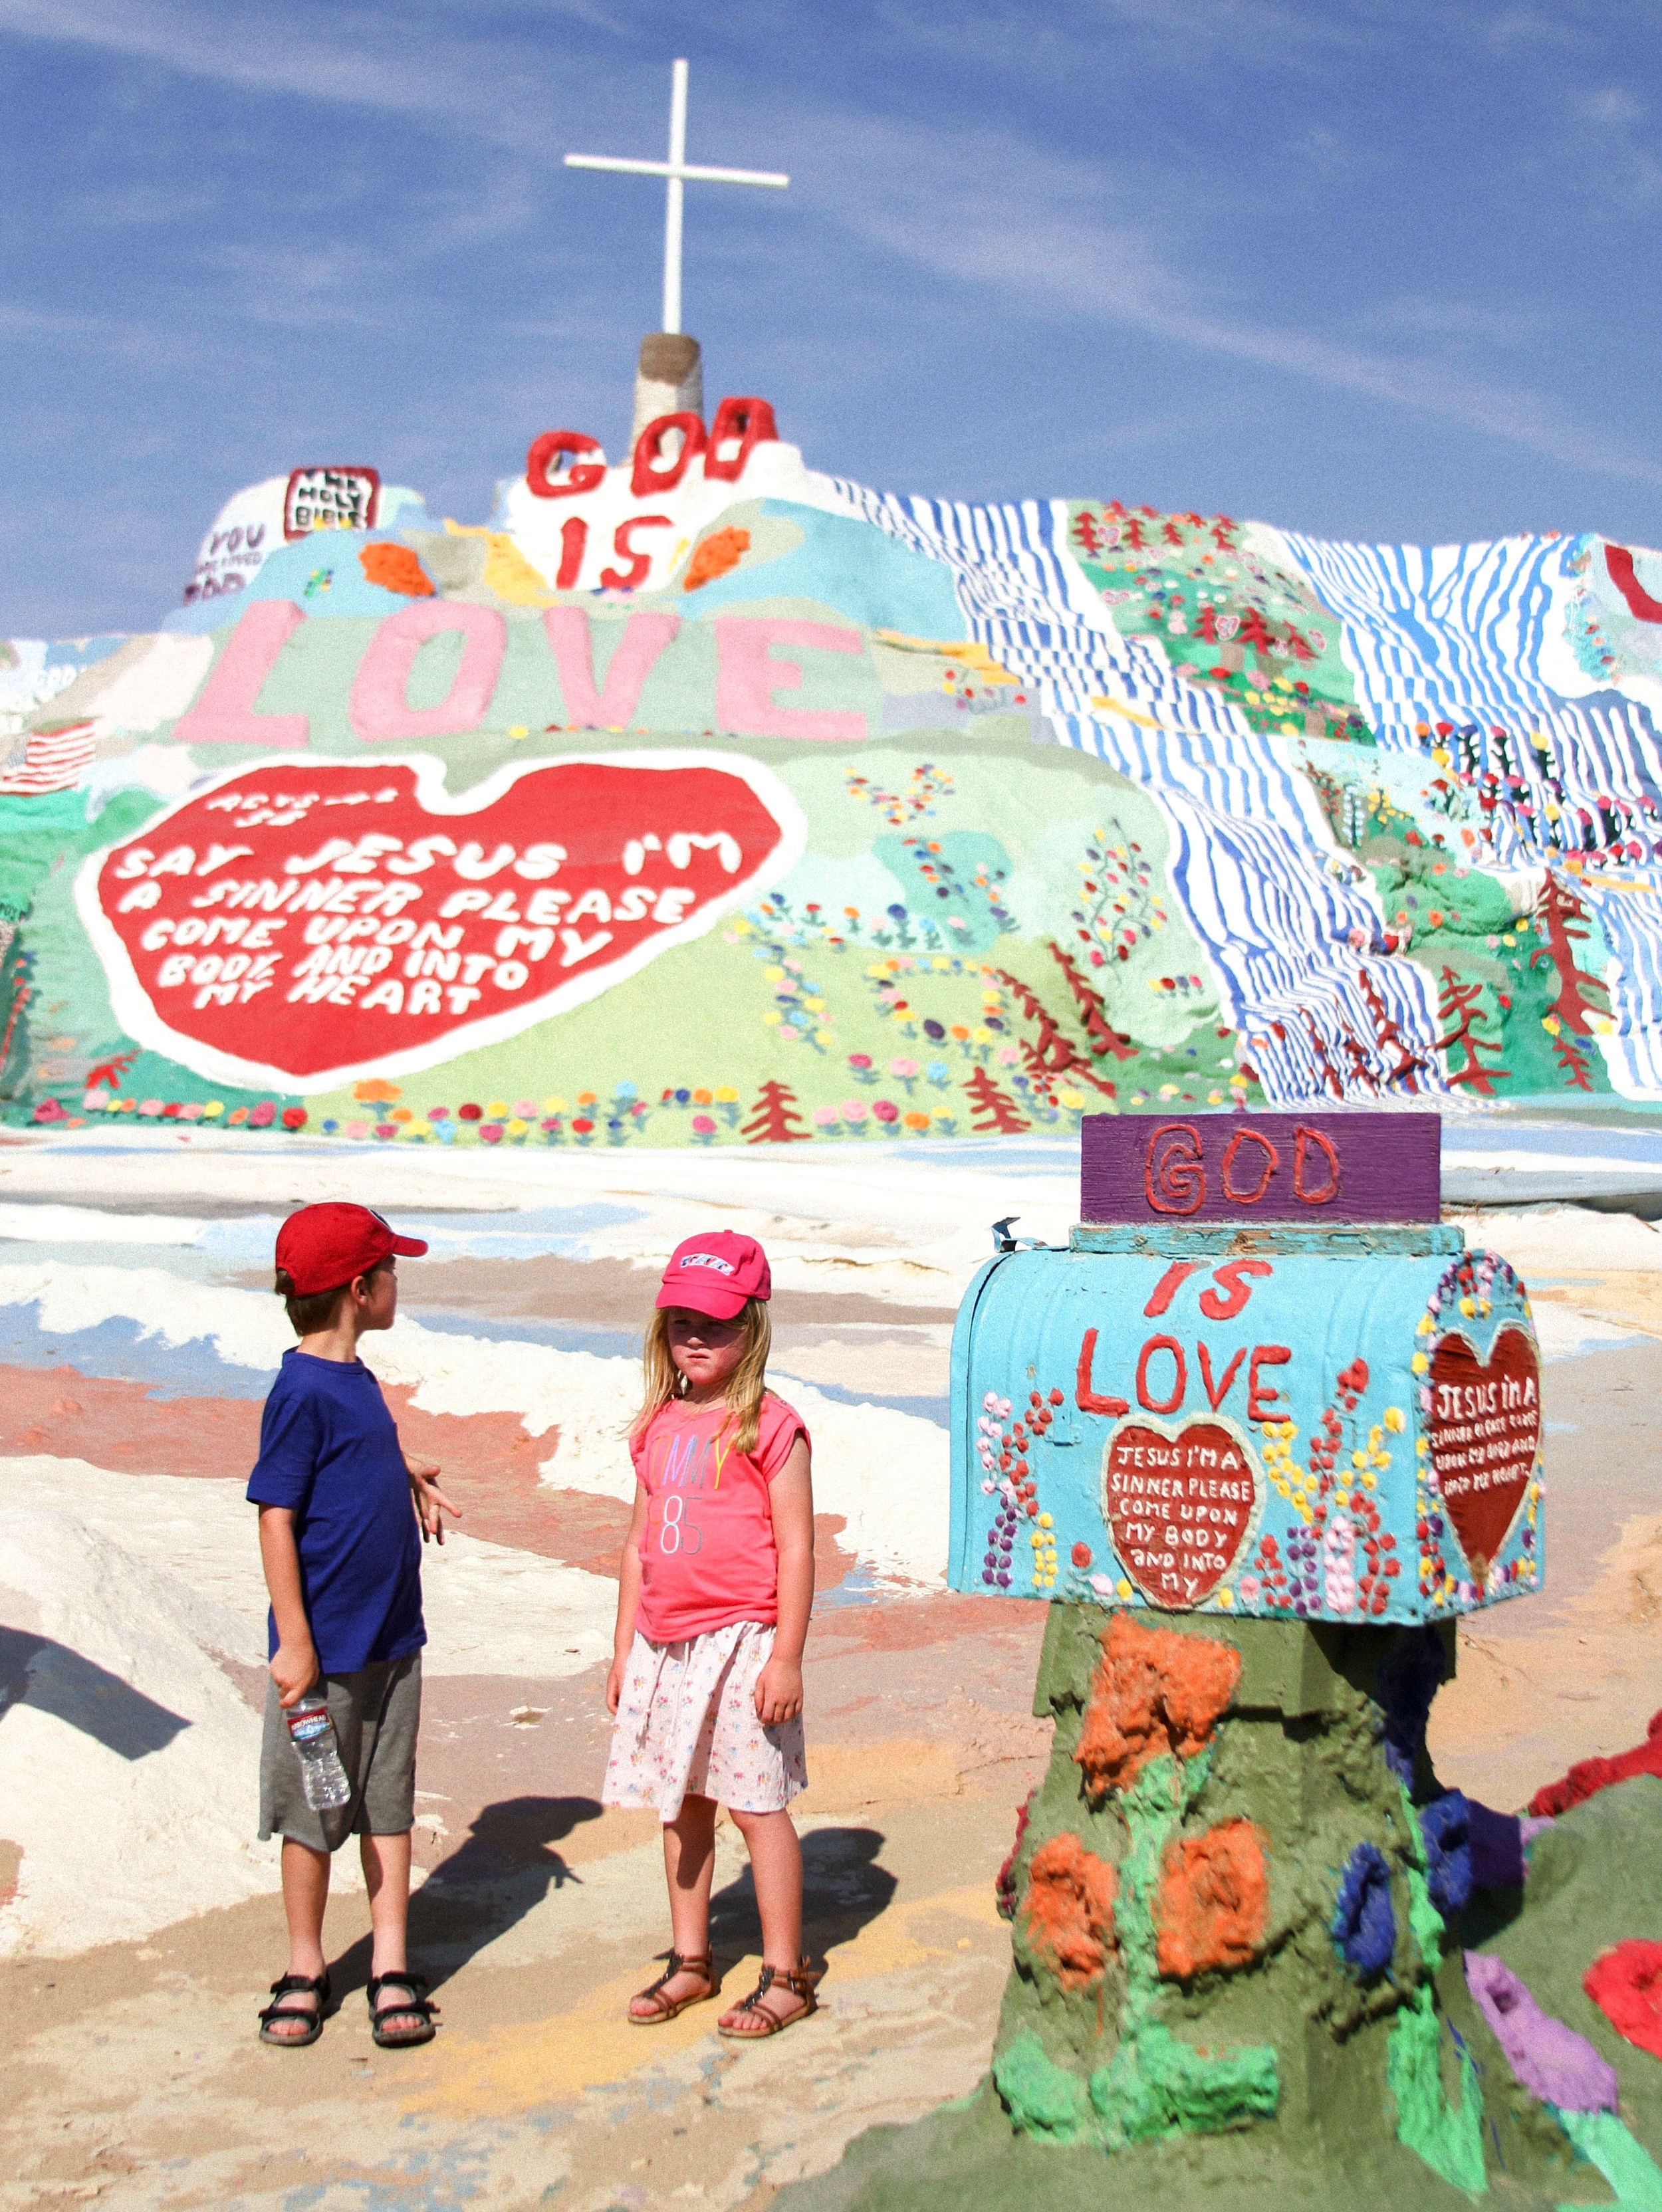  Two children wait for their parents to take their picture on Tuesday, July 29, 2014, at Salvation Mountain in Niland, Ca. Salvation Mountain is a man-made mountain created by artist Leonard Knight and is based on the Christian term,&nbsp;"Sinner's P